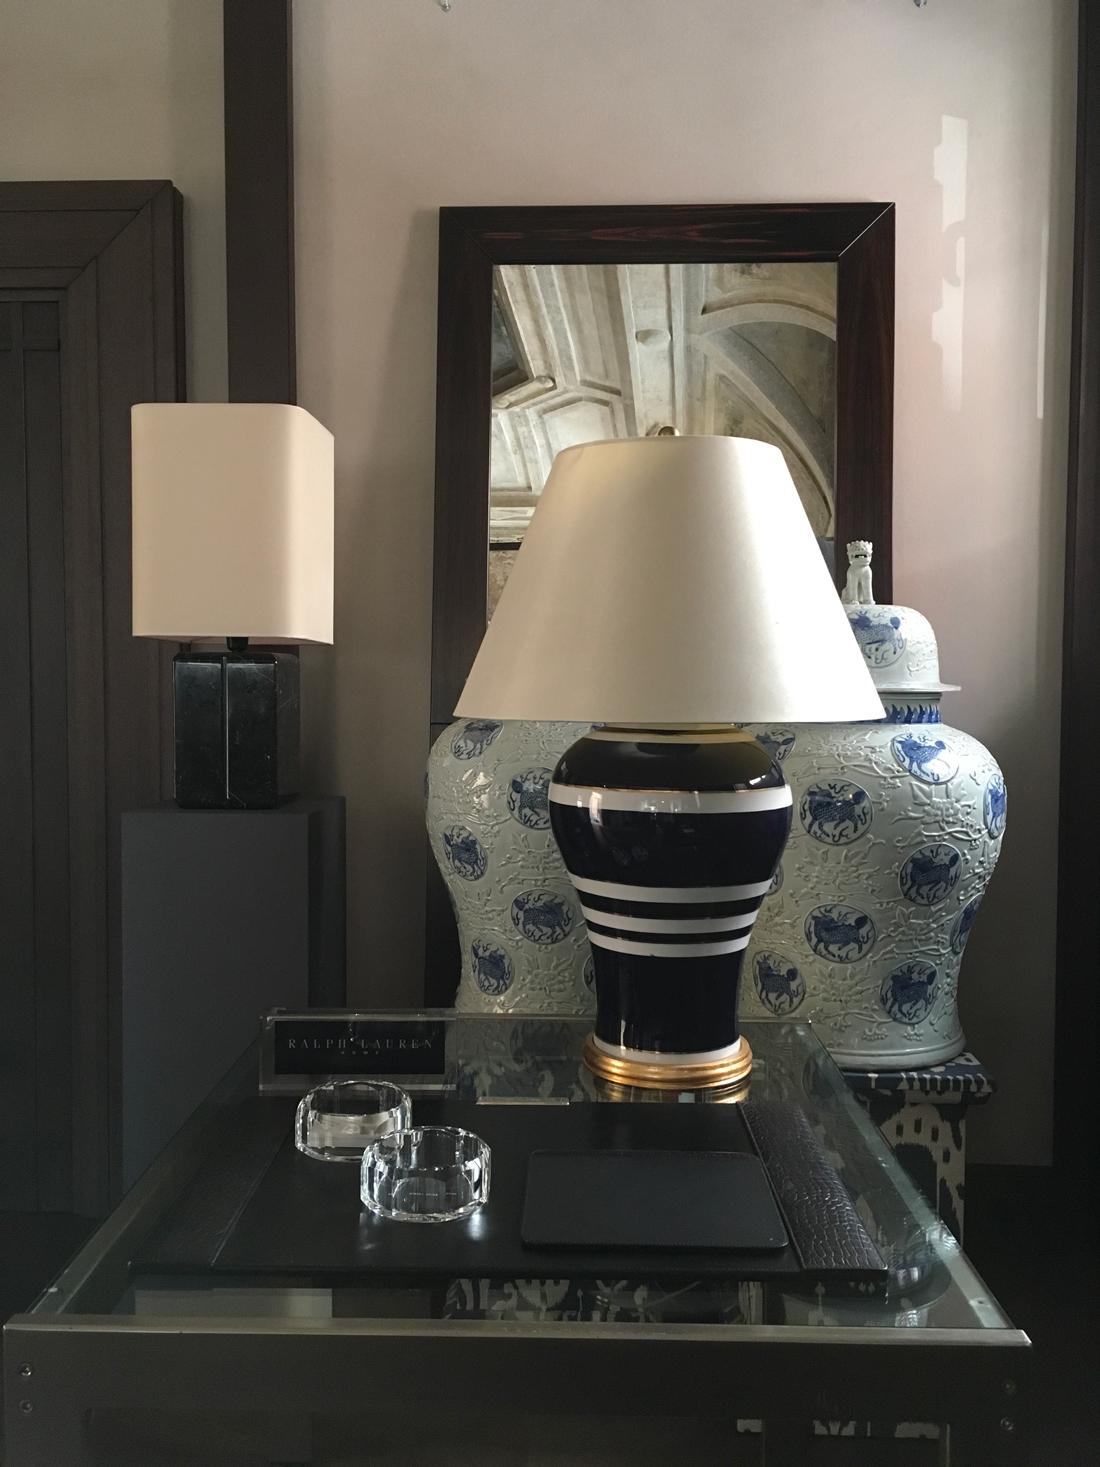 This is a Classic ginger jar silhouette with striped glazed smooth porcelain lamp that is topped with a white silk Empire shade to tie the look together.
Hand painted horizontal stripes. Ralph Lauren label.
Timeless Ralph Lauren table lamps.
EU